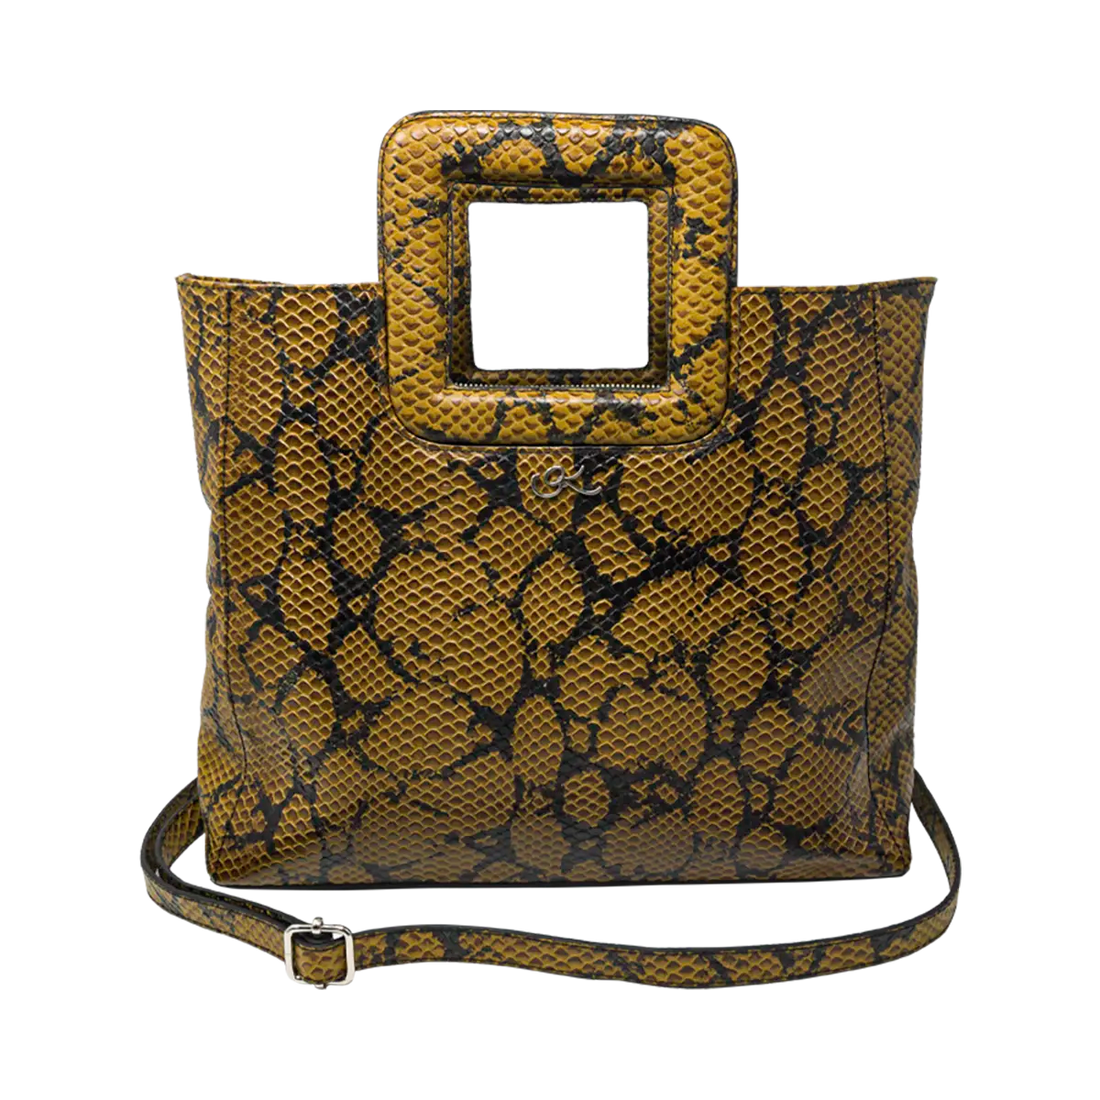 large brown print leather print handbag with a square handle. Accessory for women in San Diego, CA.